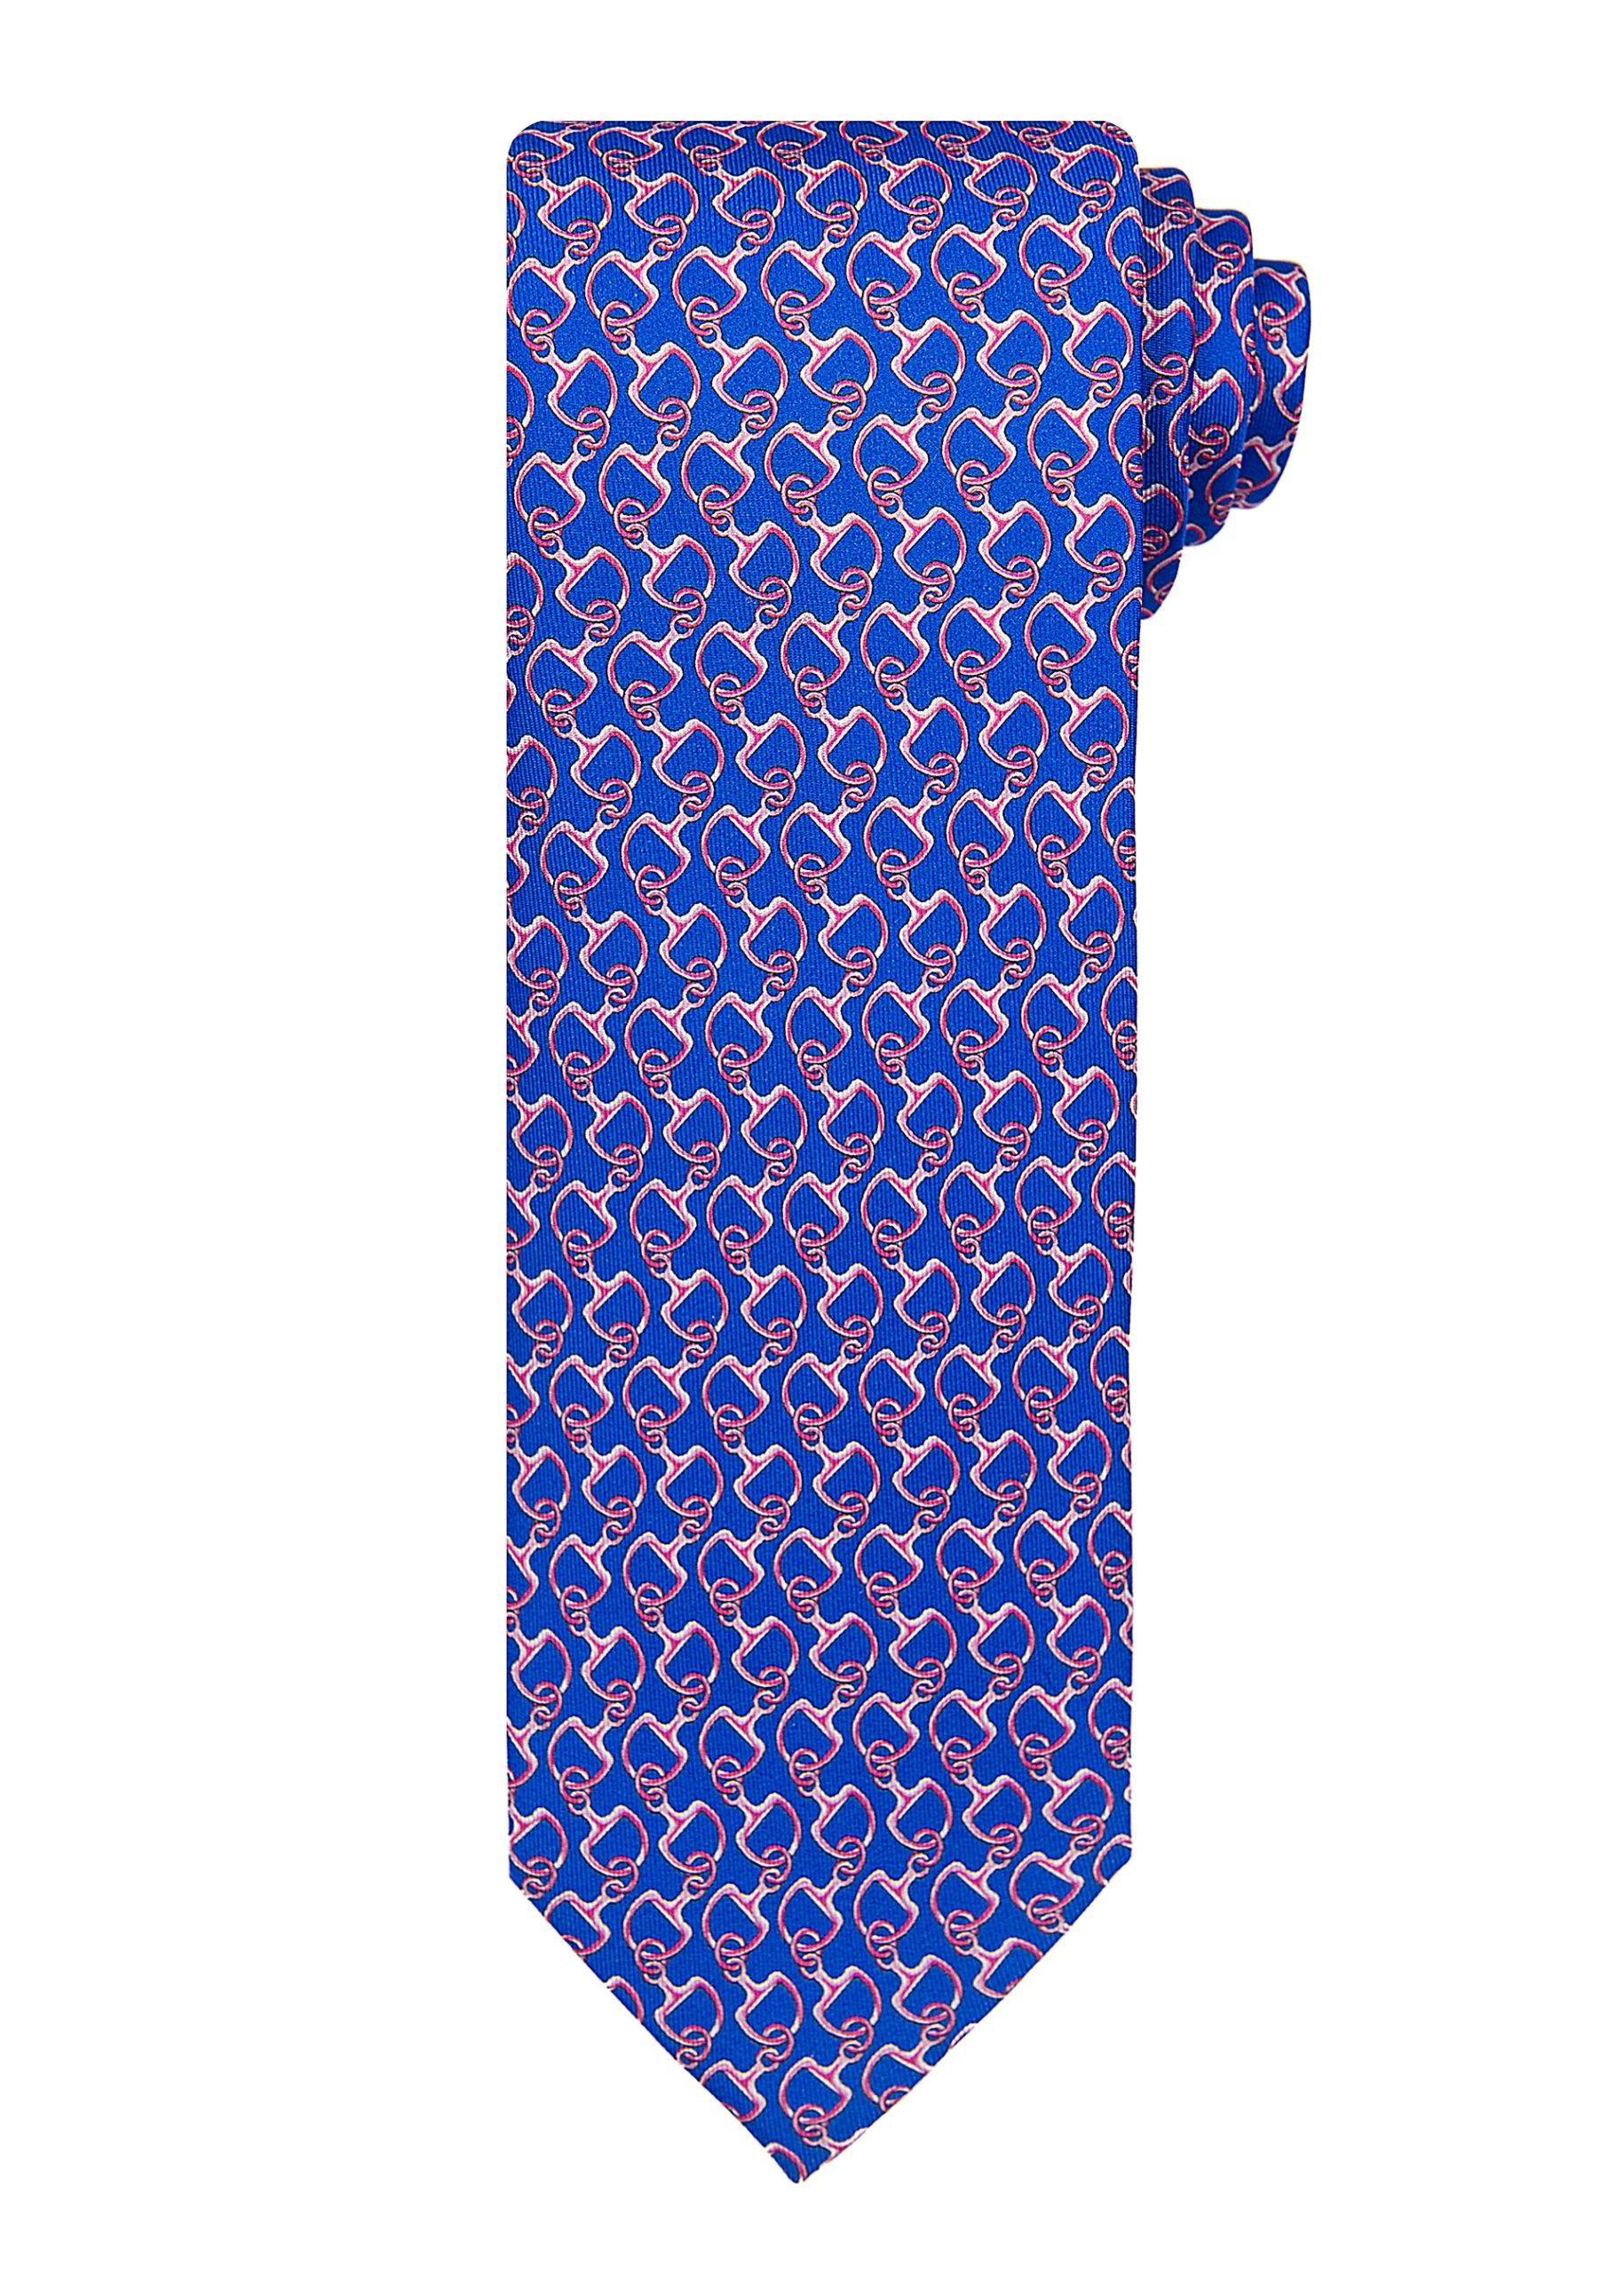 Roderick Charles snaffle patterned tie in royal and pink